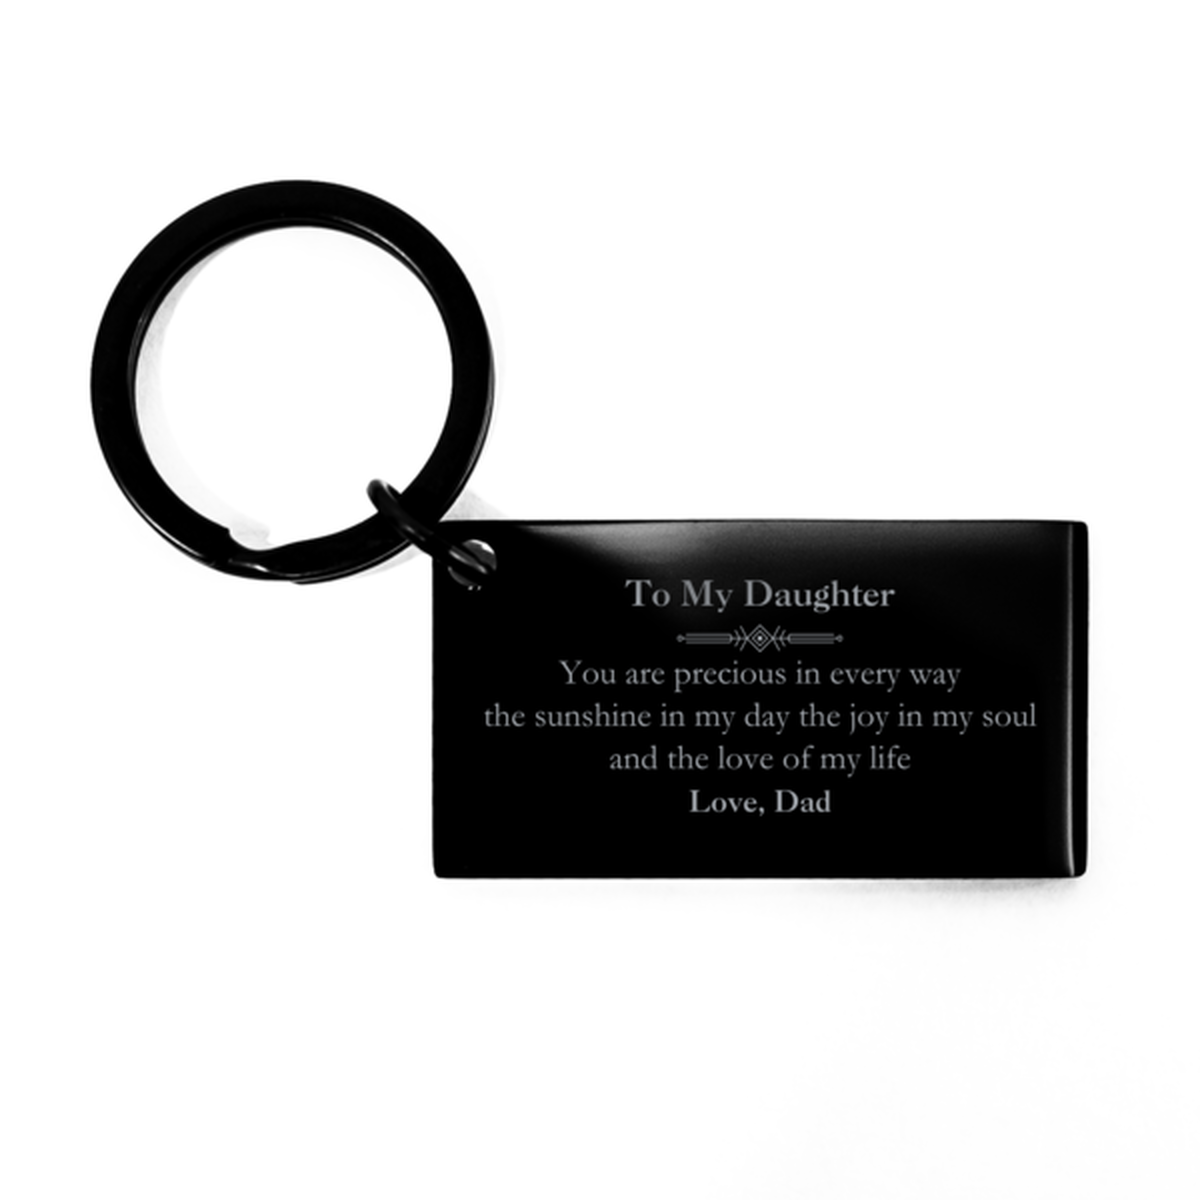 Graduation Gifts for Daughter Keychain Present from Dad, Christmas Daughter Birthday Gifts Daughter You are precious in every way the sunshine in my day. Love, Dad